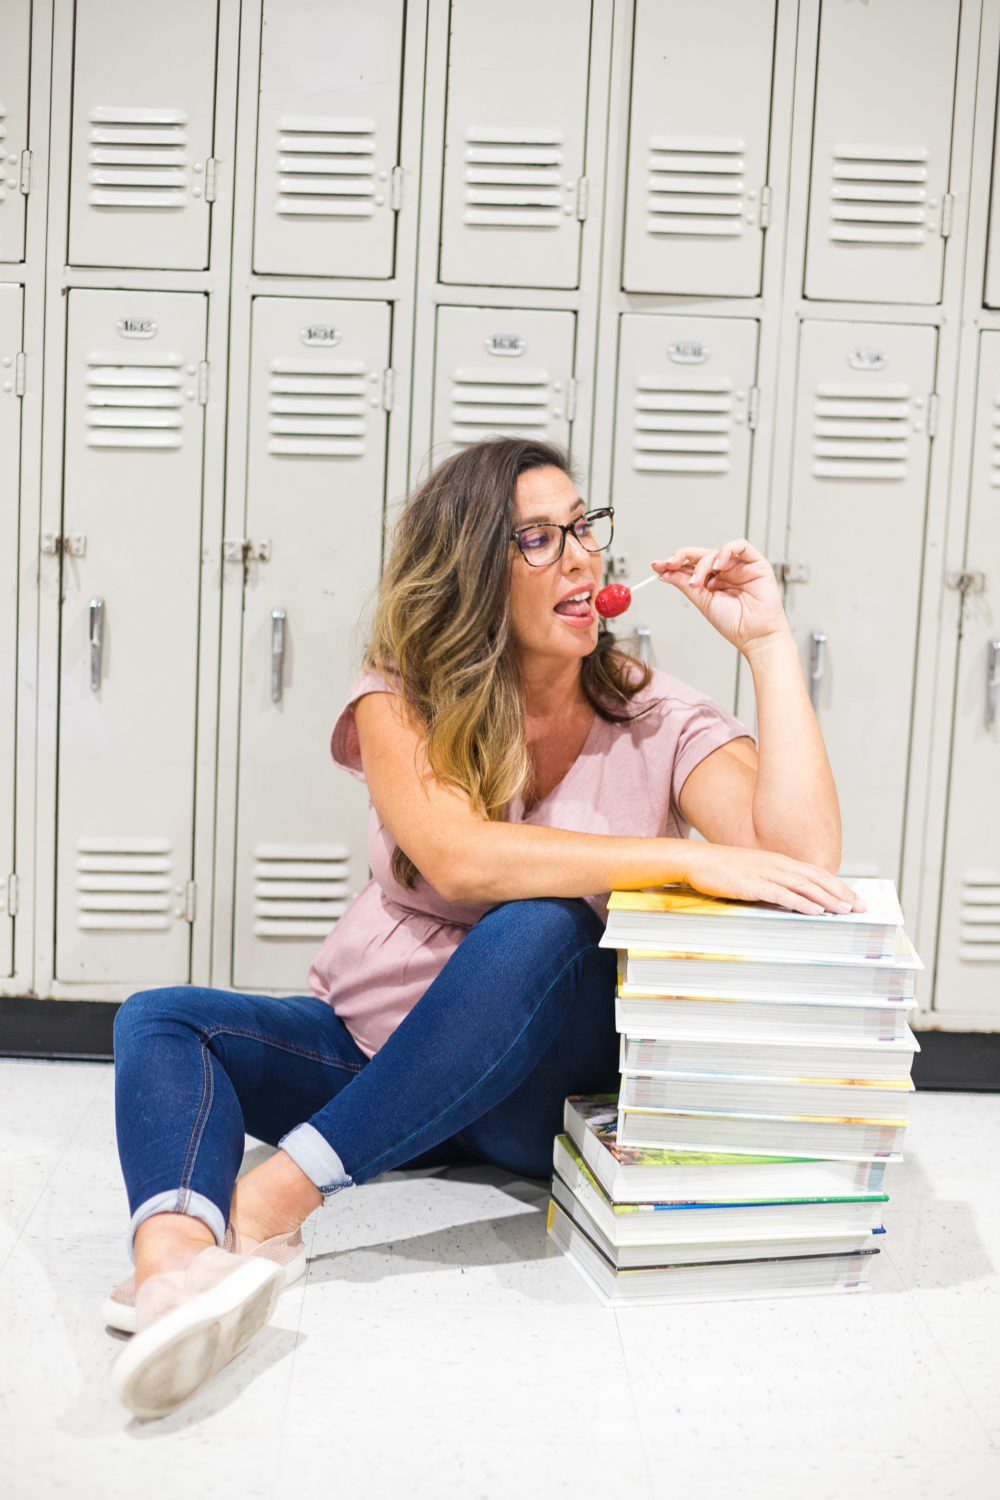 Back to School Eye Exam: How to Prepare your Child for a Successful Academic Year | Back to School Eye Exam: How to Prepare your Child for a Successful Academic Year by popular Florida lifestyle blog, Fresh Mommy Blog: image of a woman sitting in front of some school lockers wearing a pair of blue light glasses, holding a sucker, and resting her elbow on a stack of books. 